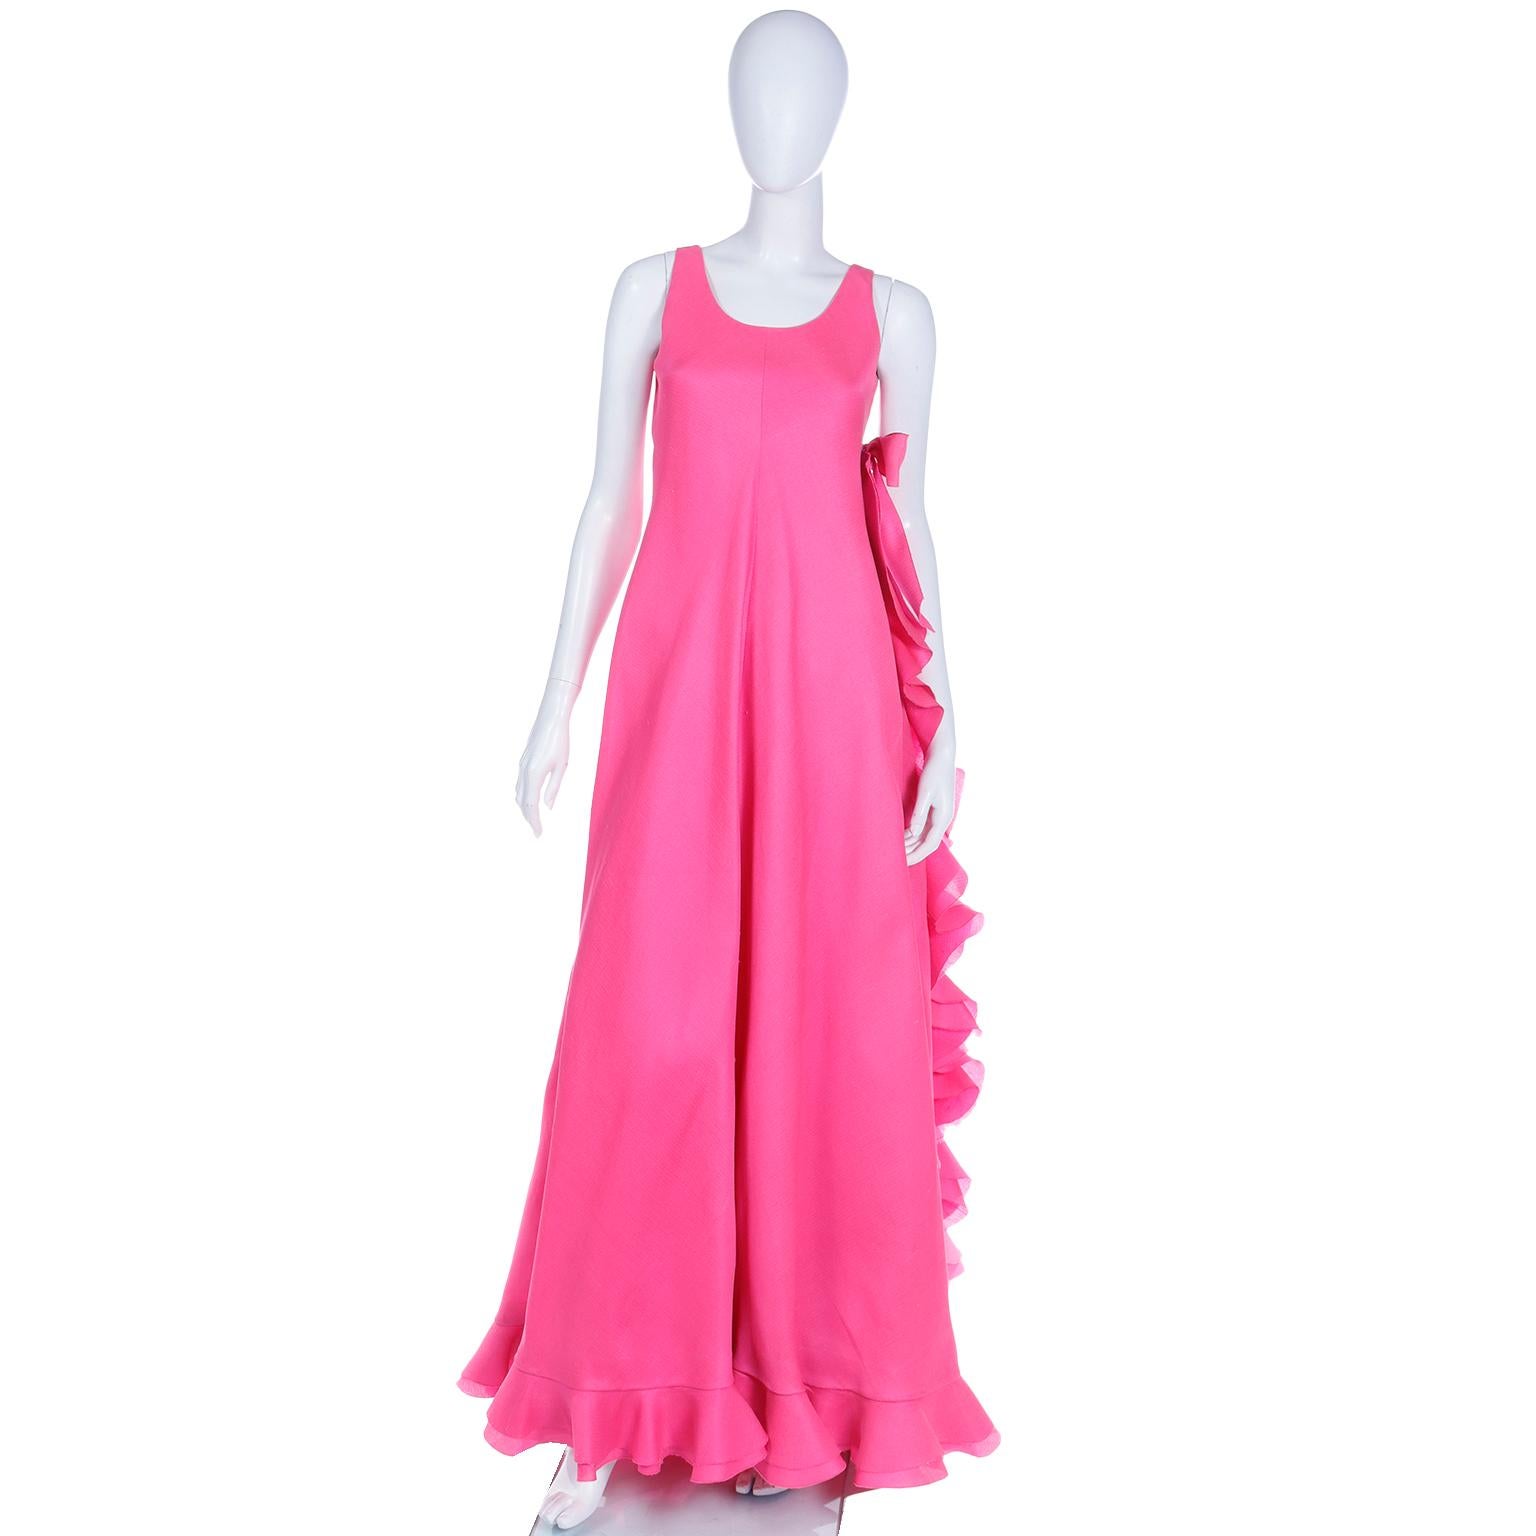 1971 Christian Dior Haute Couture Pink Ruffled Runway Evening Dress Grace Kelly  4